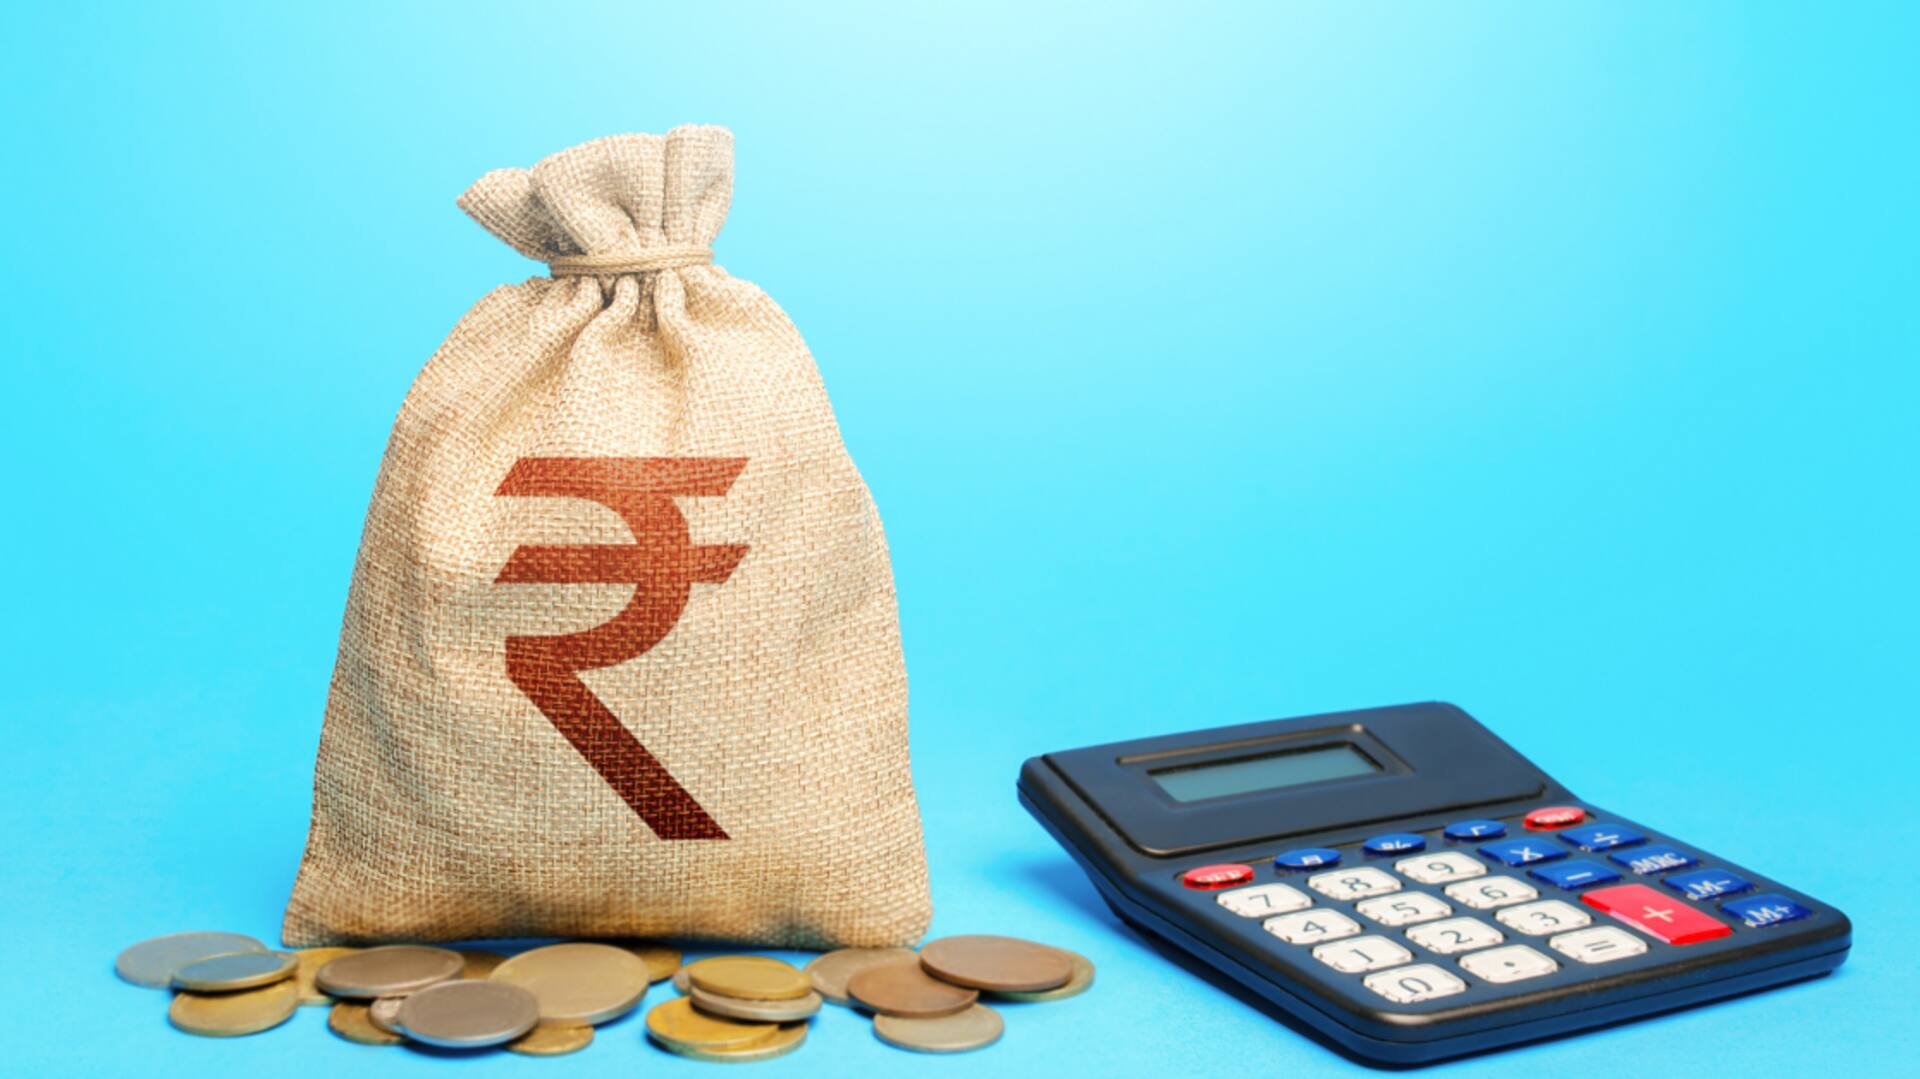 RBI to simplify floating-to-fixed rate conversion for loan borrowers